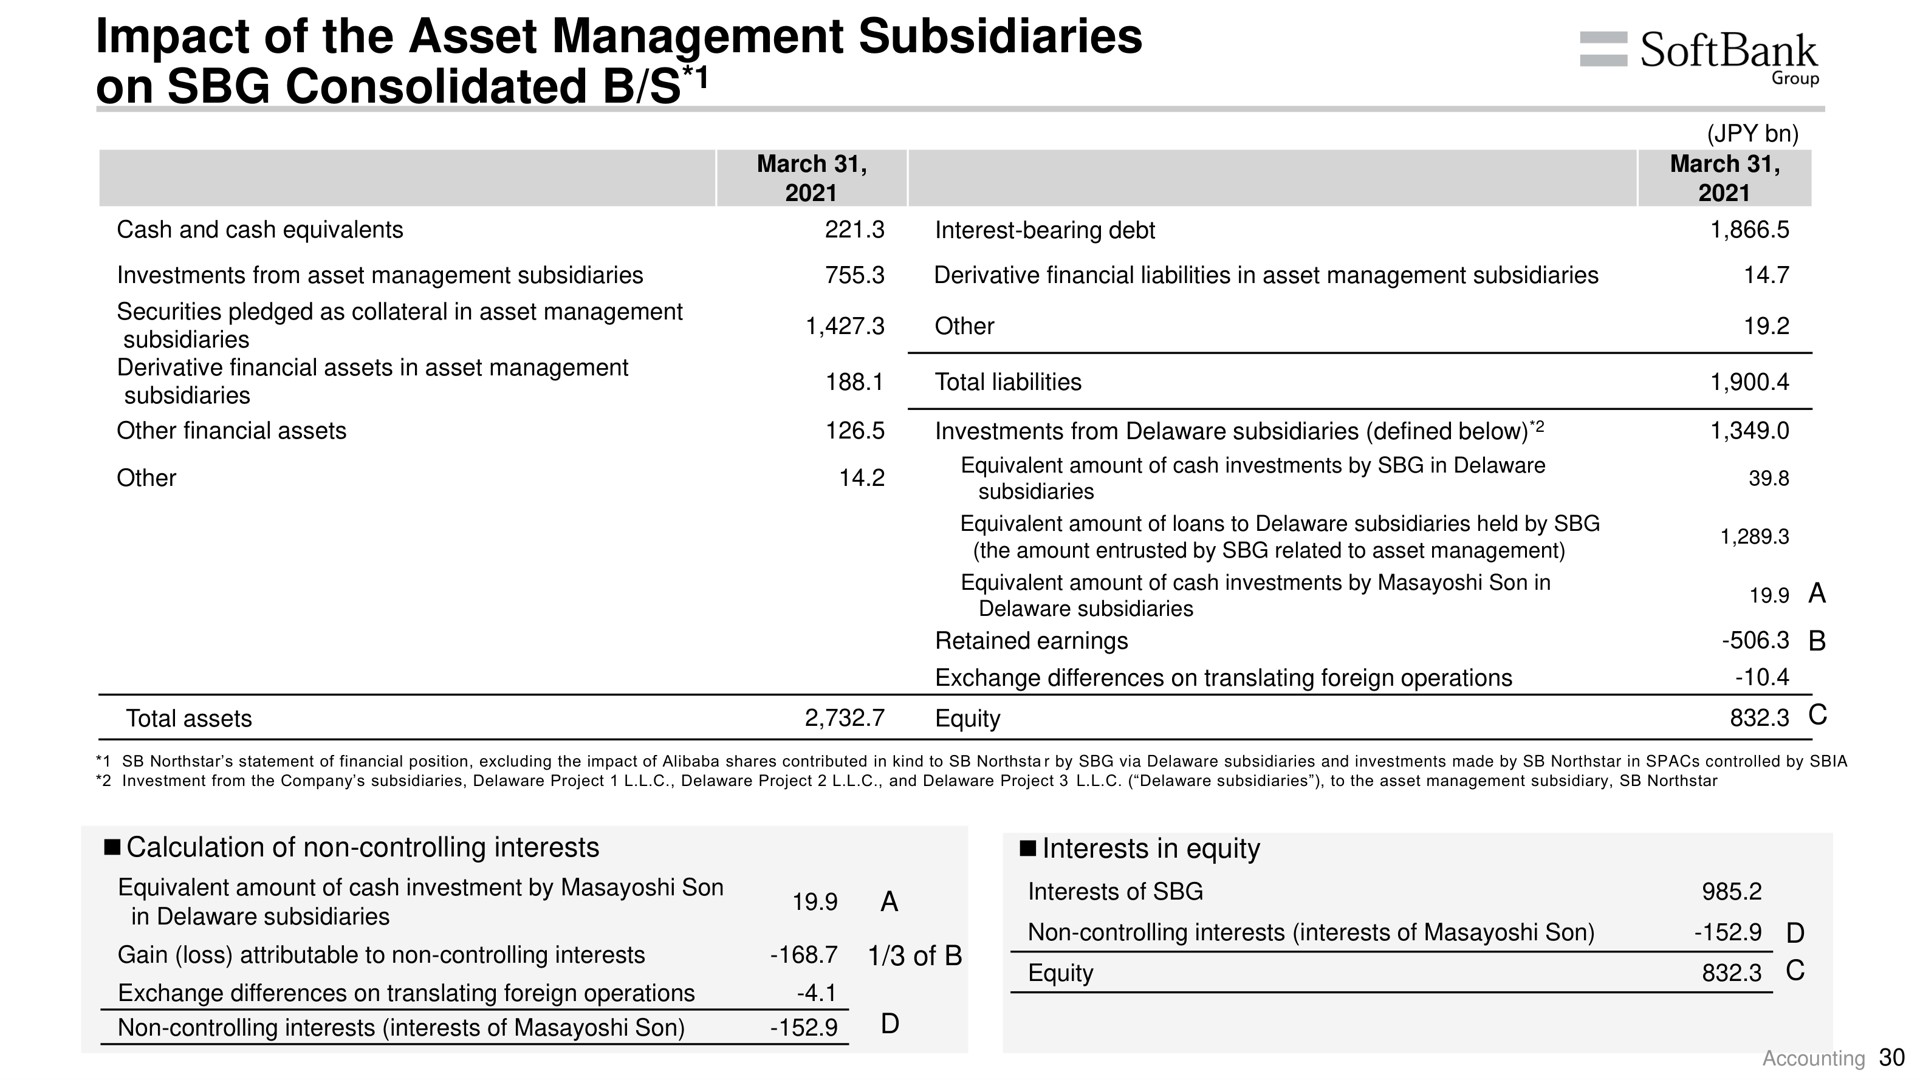 impact of the asset management subsidiaries on consolidated | SoftBank